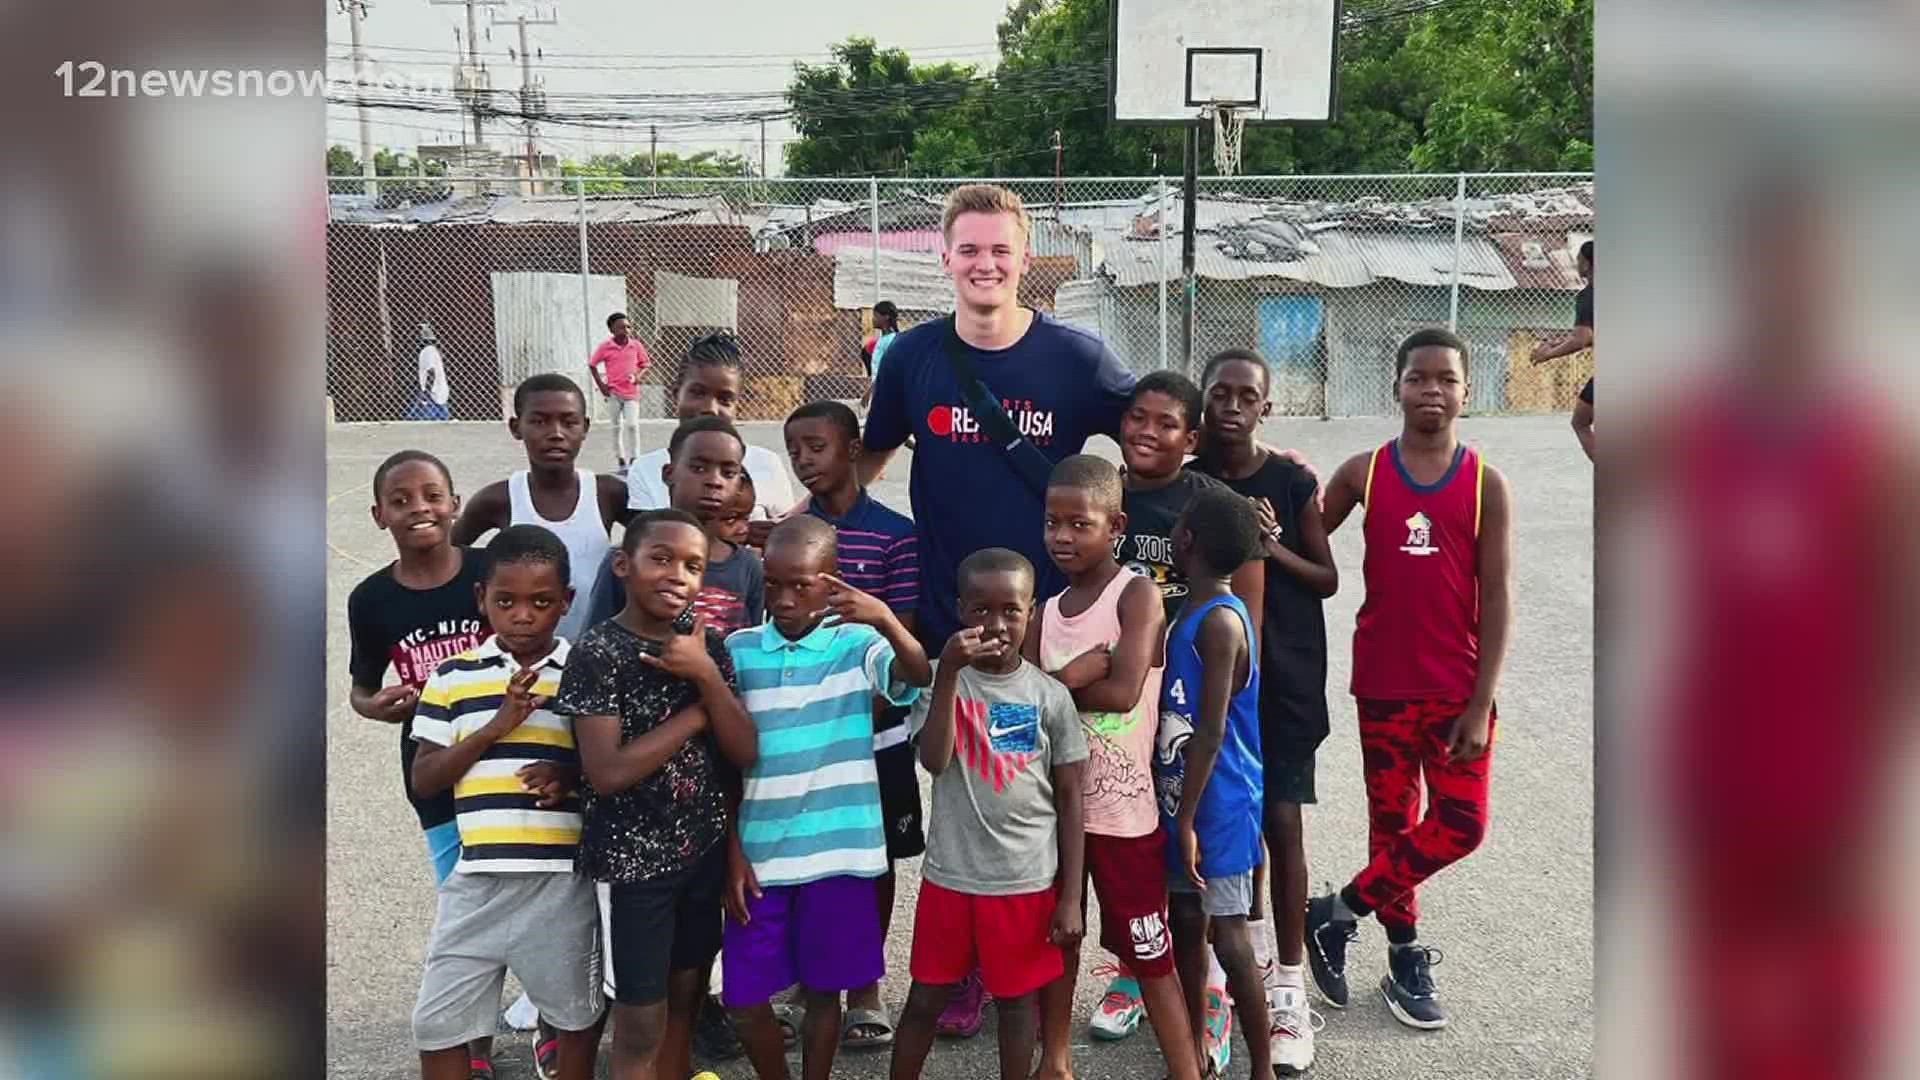 Lumberton native Brock McClure spread the word of Jesus Christ while also helping the less fortunate in Jamaica